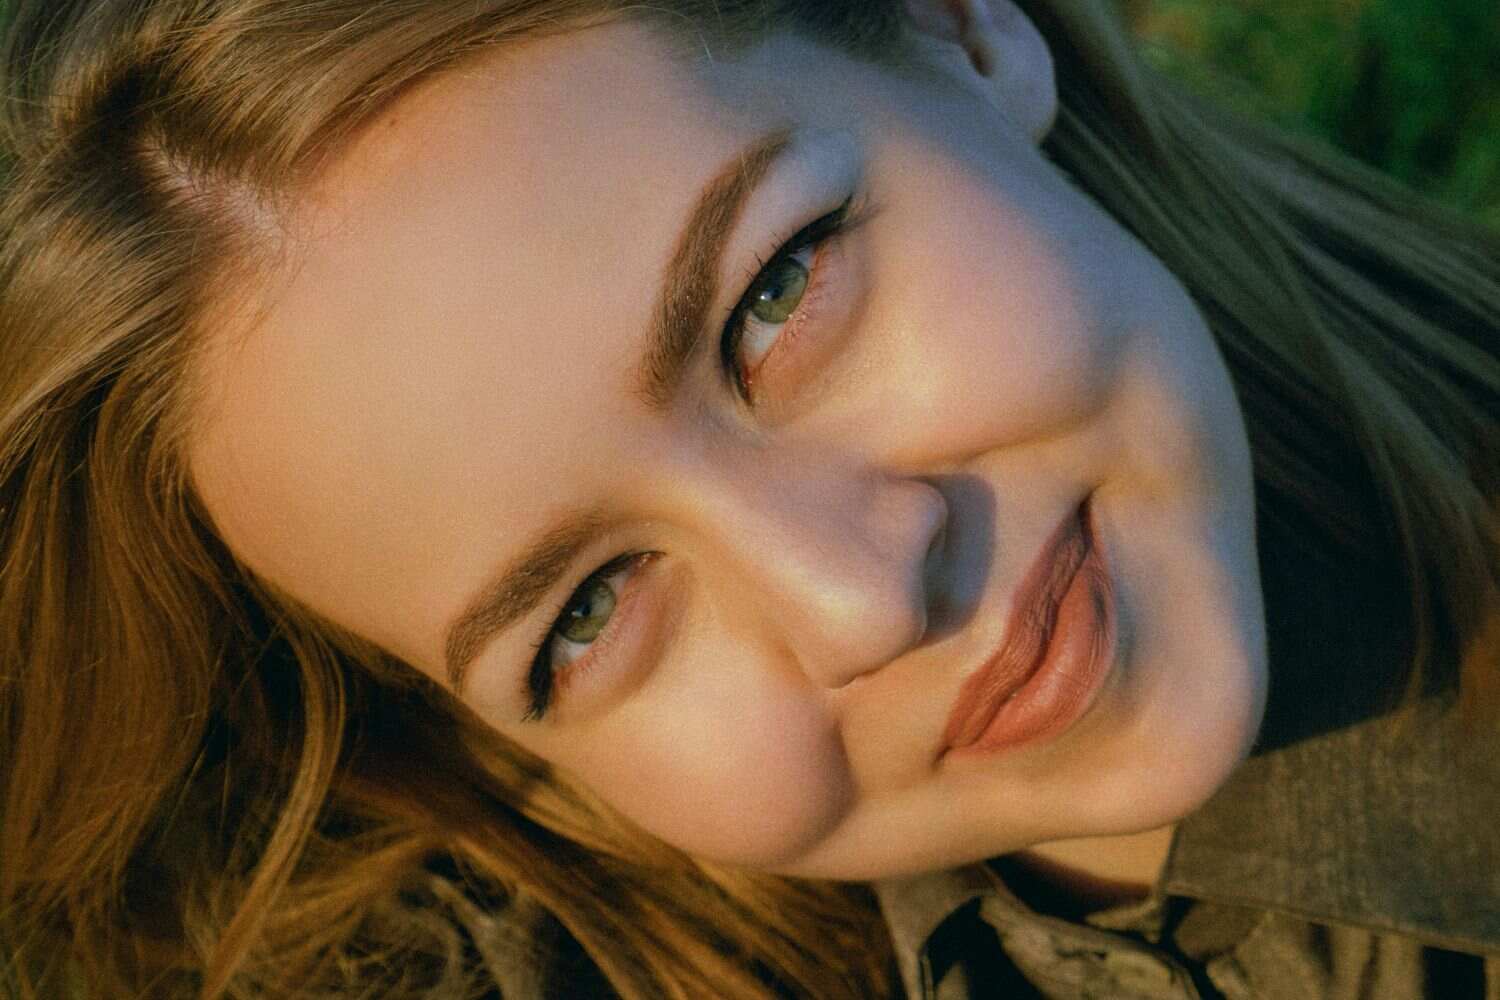 A photo of a girl with the zoom-in face